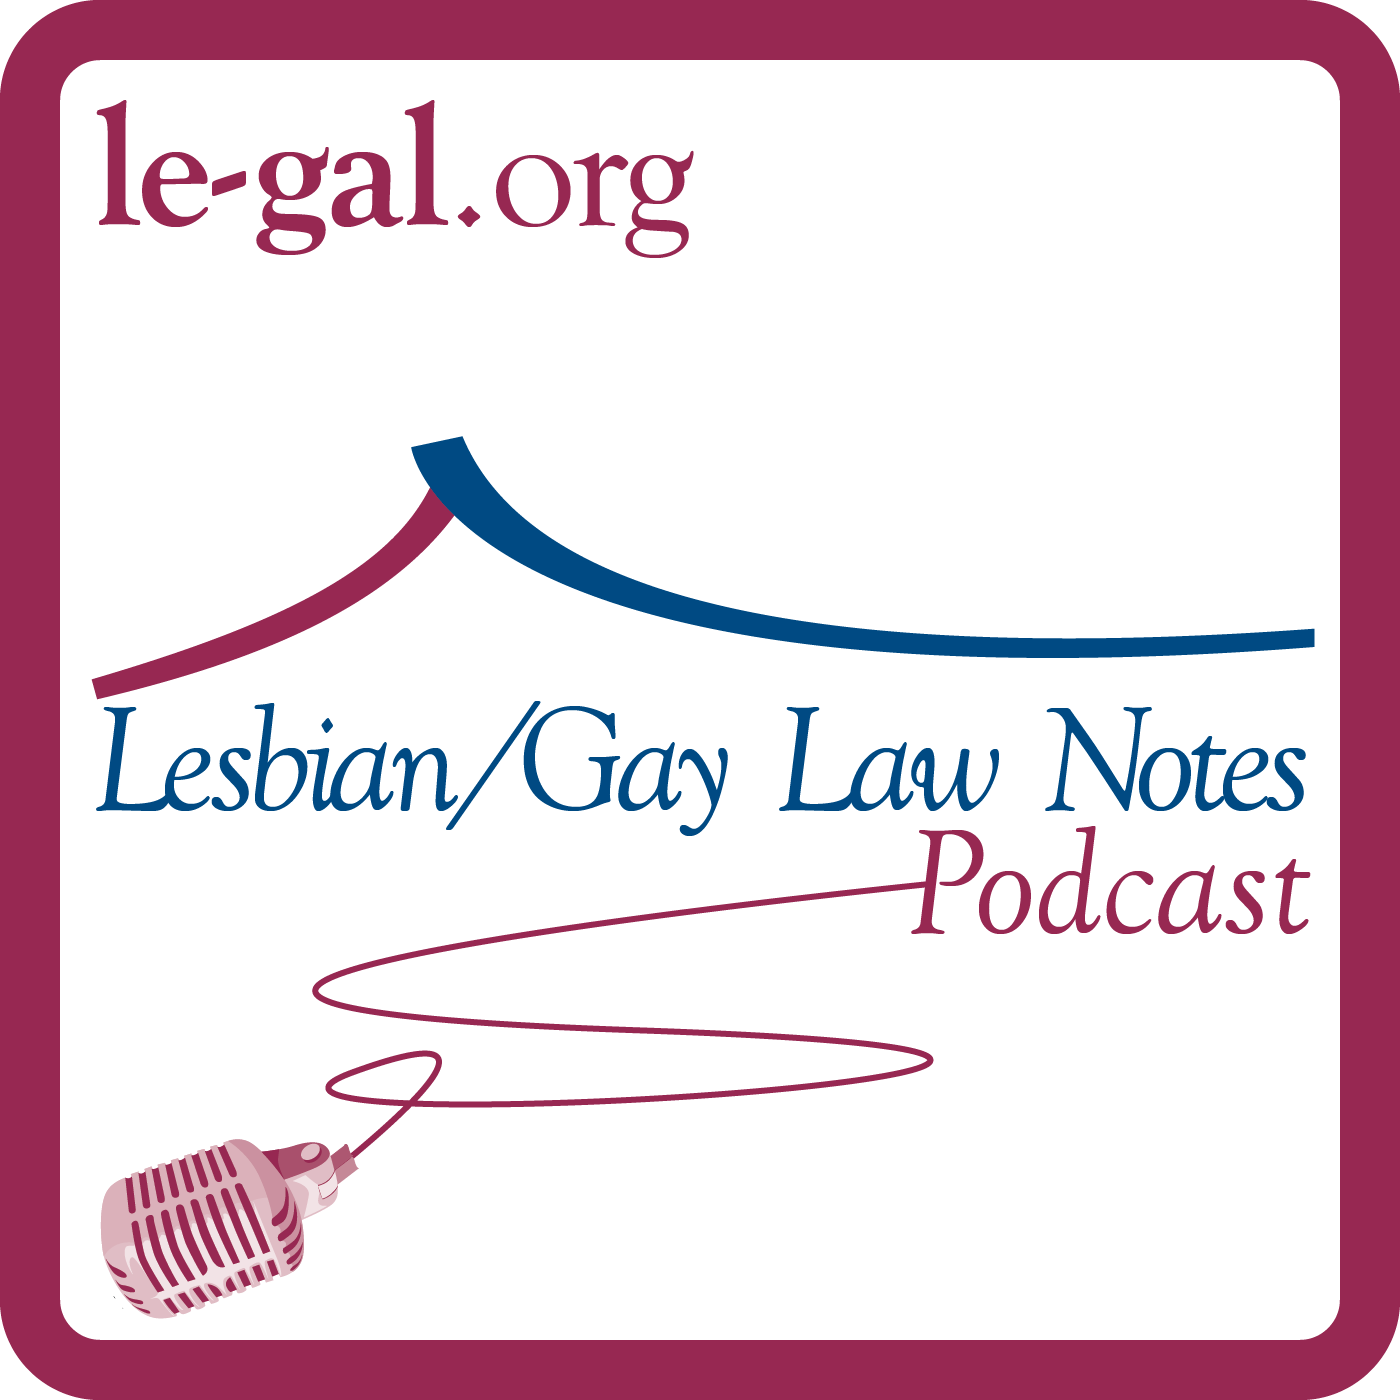  Lesbian/Gay Law Notes Podcast: September 2013